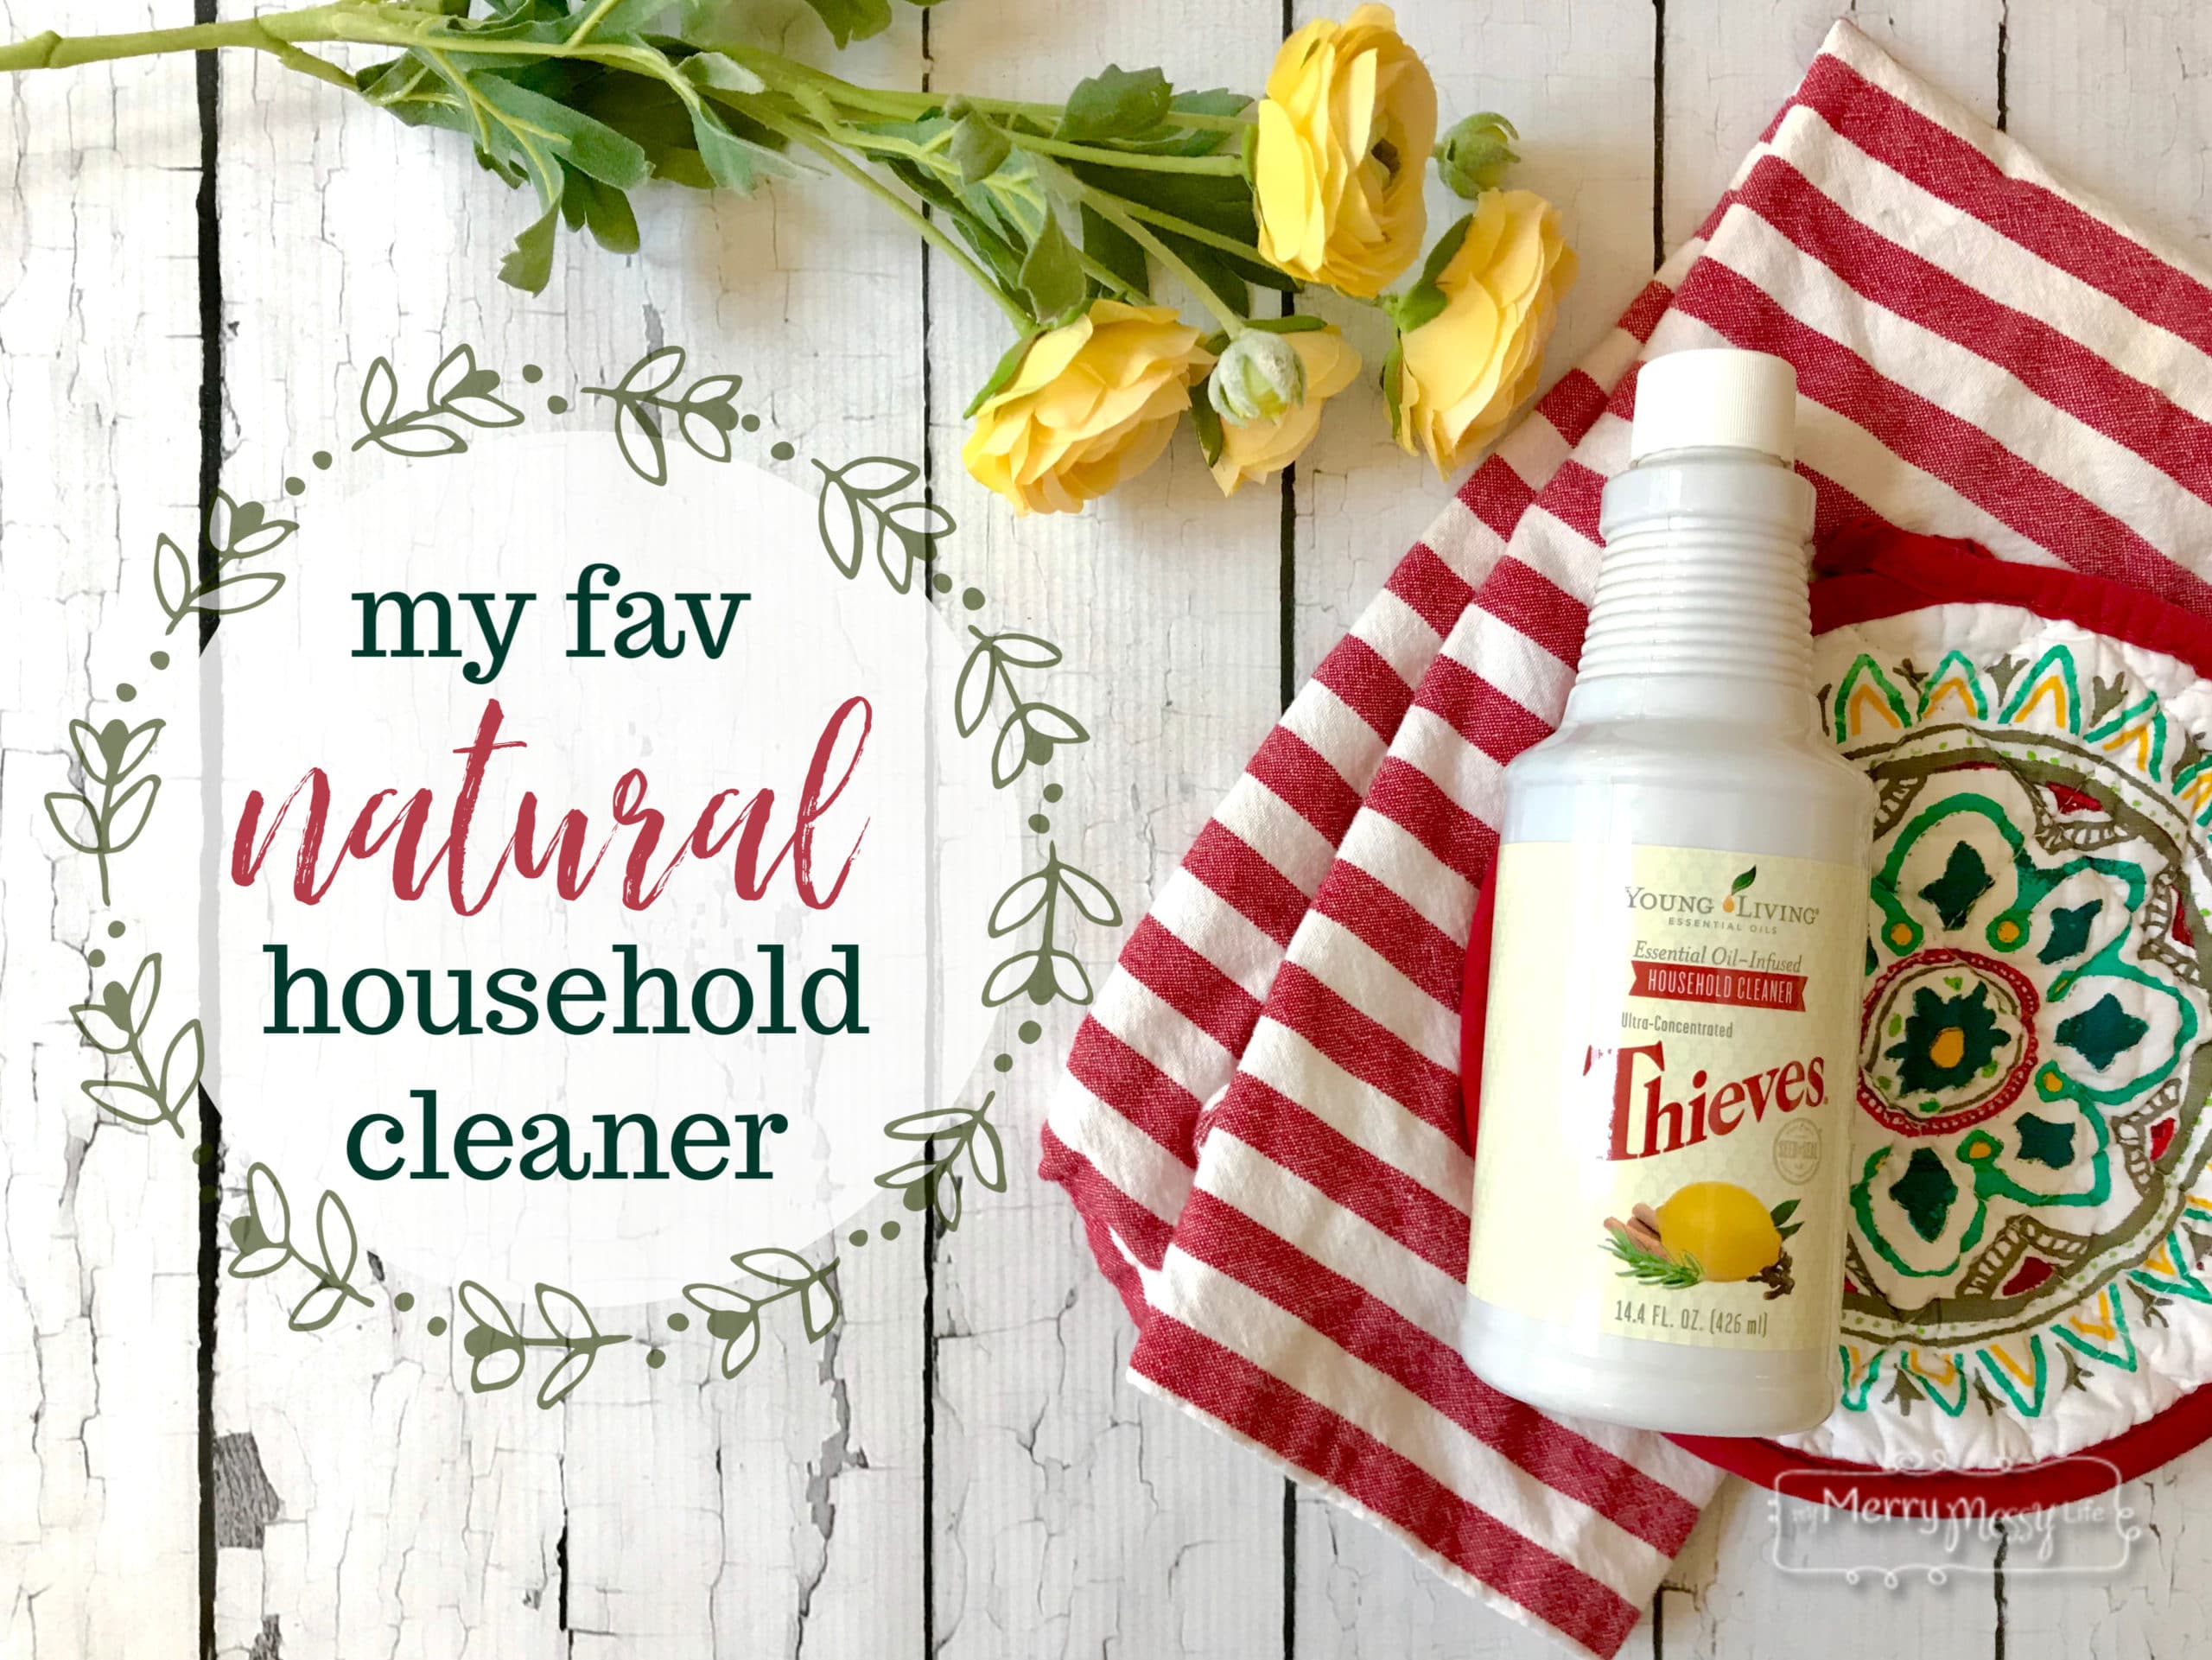 My Favorite Natural Household Cleaner and 25 Ways to Use It